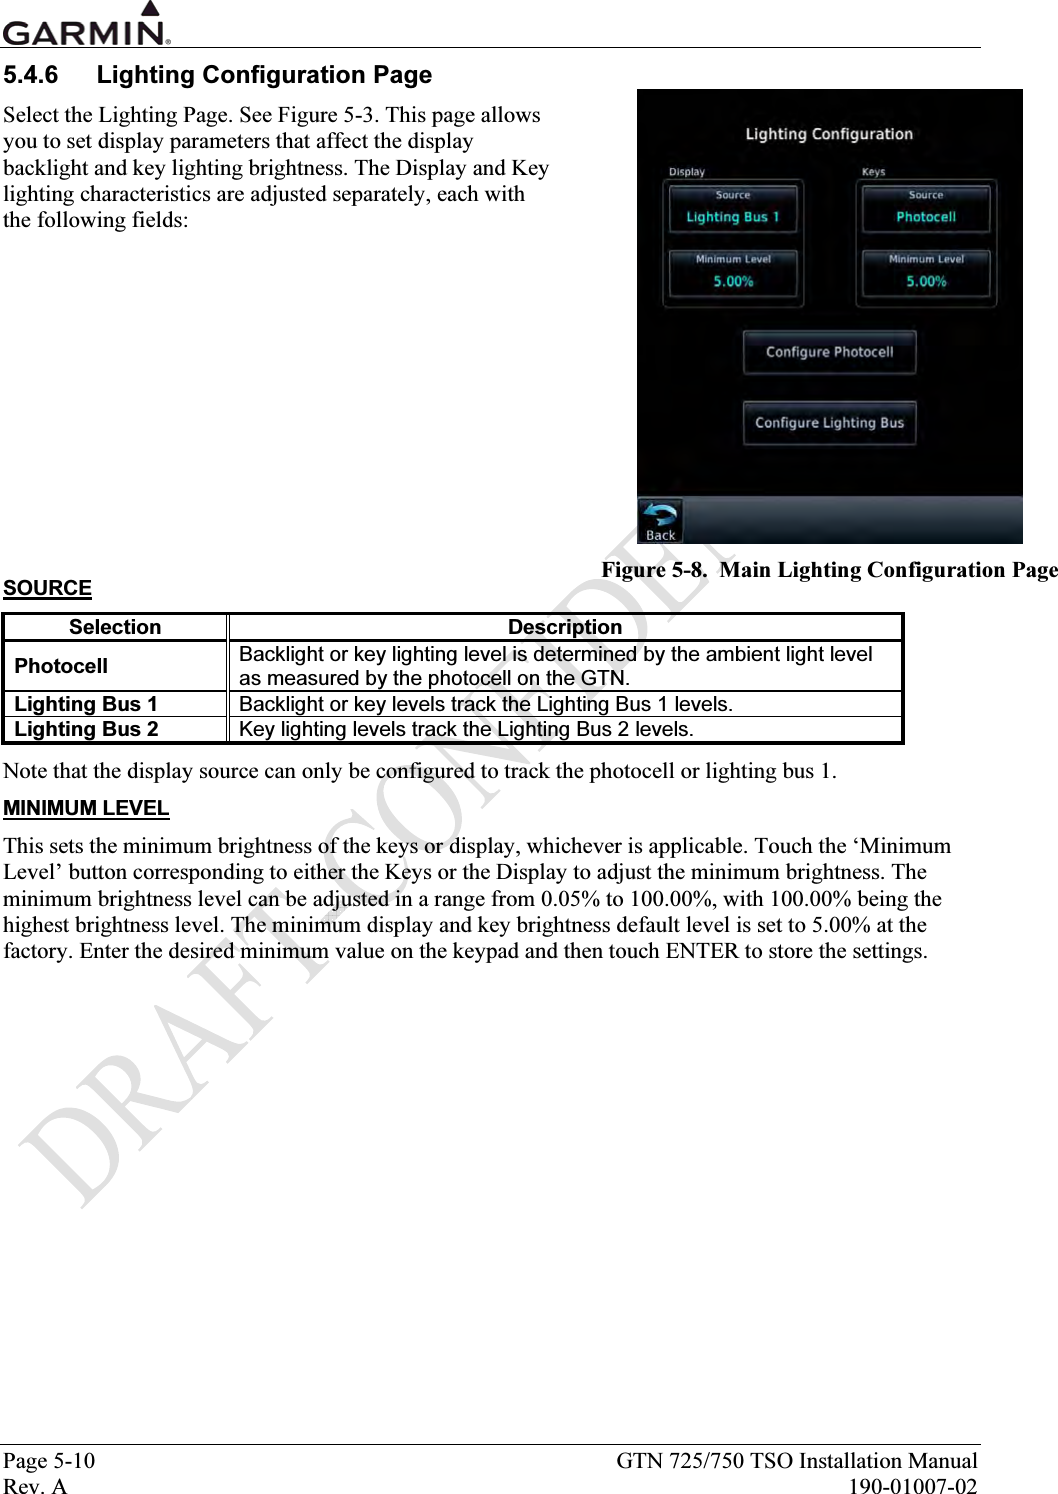  Page 5-10  GTN 725/750 TSO Installation Manual Rev. A  190-01007-02 5.4.6  Lighting Configuration Page Select the Lighting Page. See Figure 5-3. This page allows you to set display parameters that affect the display backlight and key lighting brightness. The Display and Key lighting characteristics are adjusted separately, each with the following fields:              SOURCE Selection Description Photocell  Backlight or key lighting level is determined by the ambient light level as measured by the photocell on the GTN. Lighting Bus 1  Backlight or key levels track the Lighting Bus 1 levels. Lighting Bus 2  Key lighting levels track the Lighting Bus 2 levels. Note that the display source can only be configured to track the photocell or lighting bus 1. MINIMUM LEVEL This sets the minimum brightness of the keys or display, whichever is applicable. Touch the ‘Minimum Level’ button corresponding to either the Keys or the Display to adjust the minimum brightness. The minimum brightness level can be adjusted in a range from 0.05% to 100.00%, with 100.00% being the highest brightness level. The minimum display and key brightness default level is set to 5.00% at the factory. Enter the desired minimum value on the keypad and then touch ENTER to store the settings.  Figure 5-8.  Main Lighting Configuration Page 